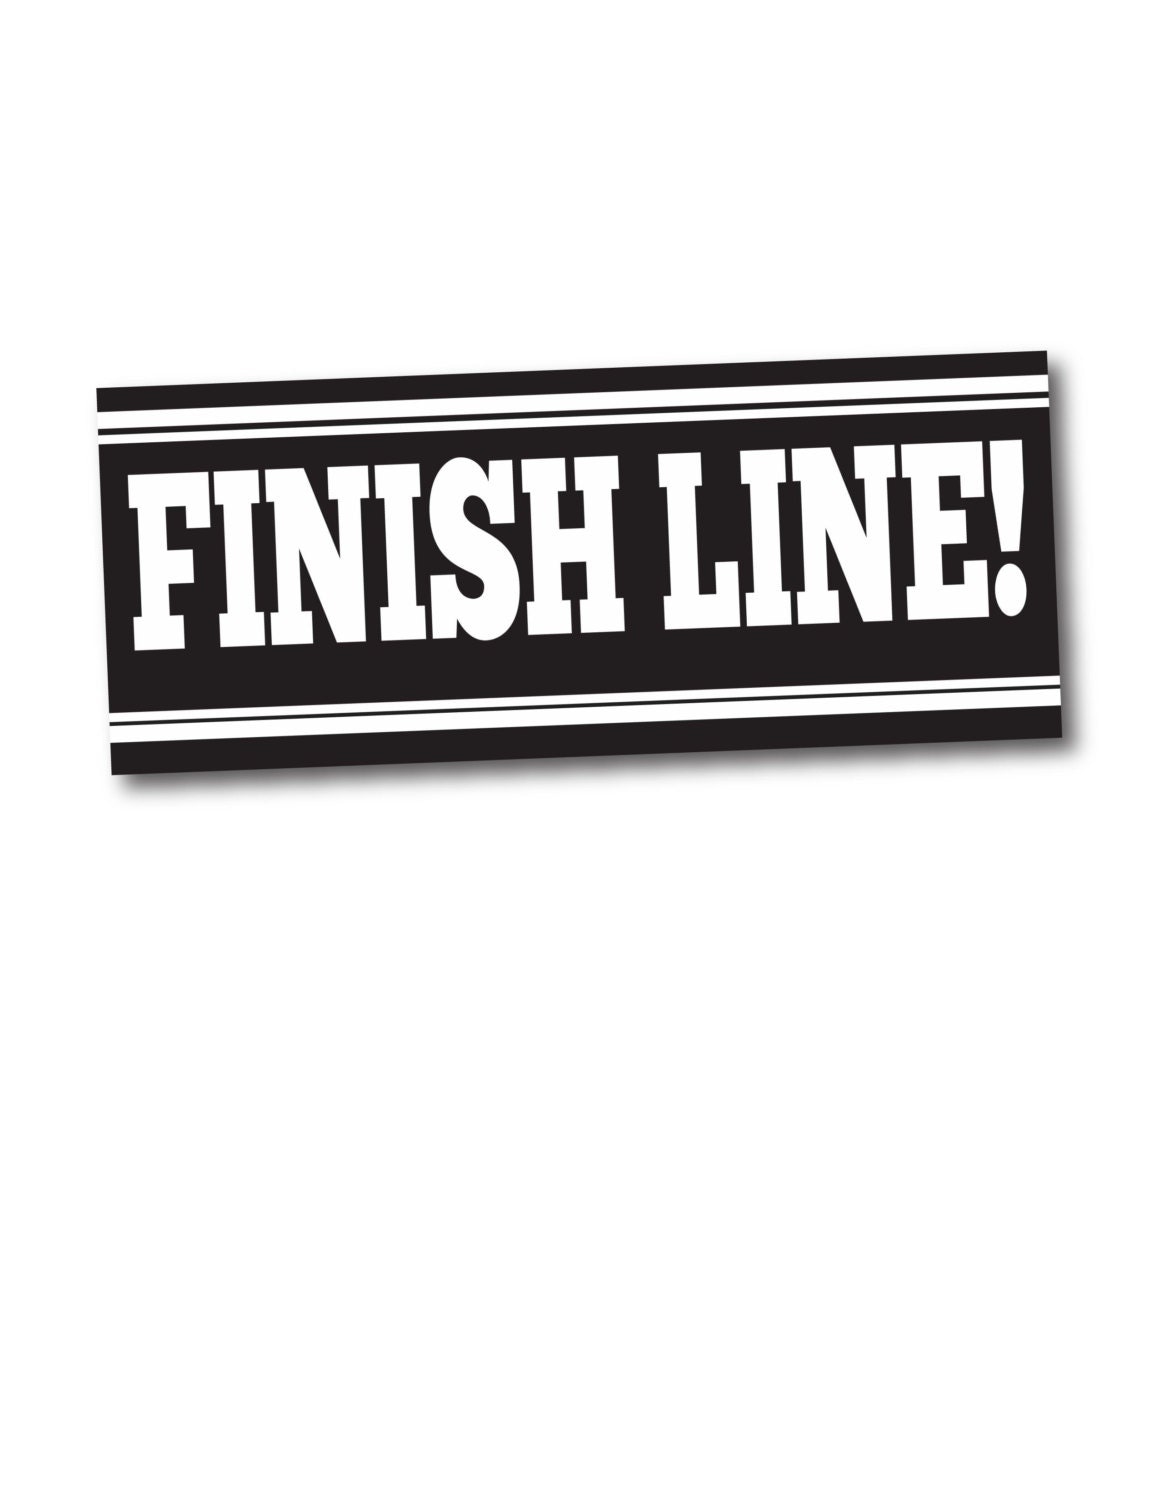 Printable paper banner FINISH LINE for Missionaries and